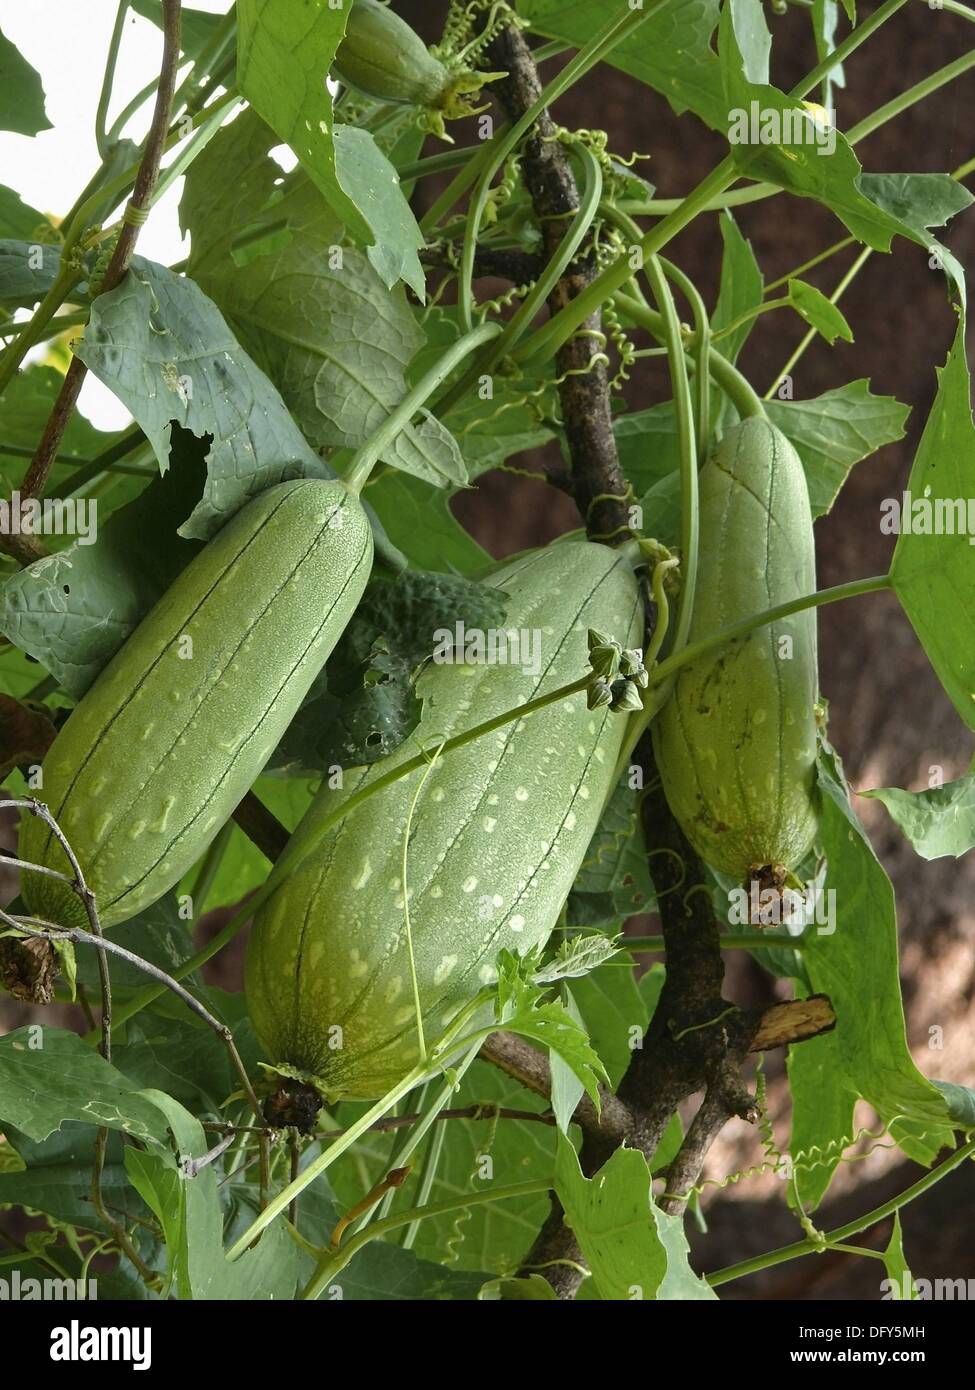 Fruits of a Sponge Gourd, Luffa cylindric Stock Photo